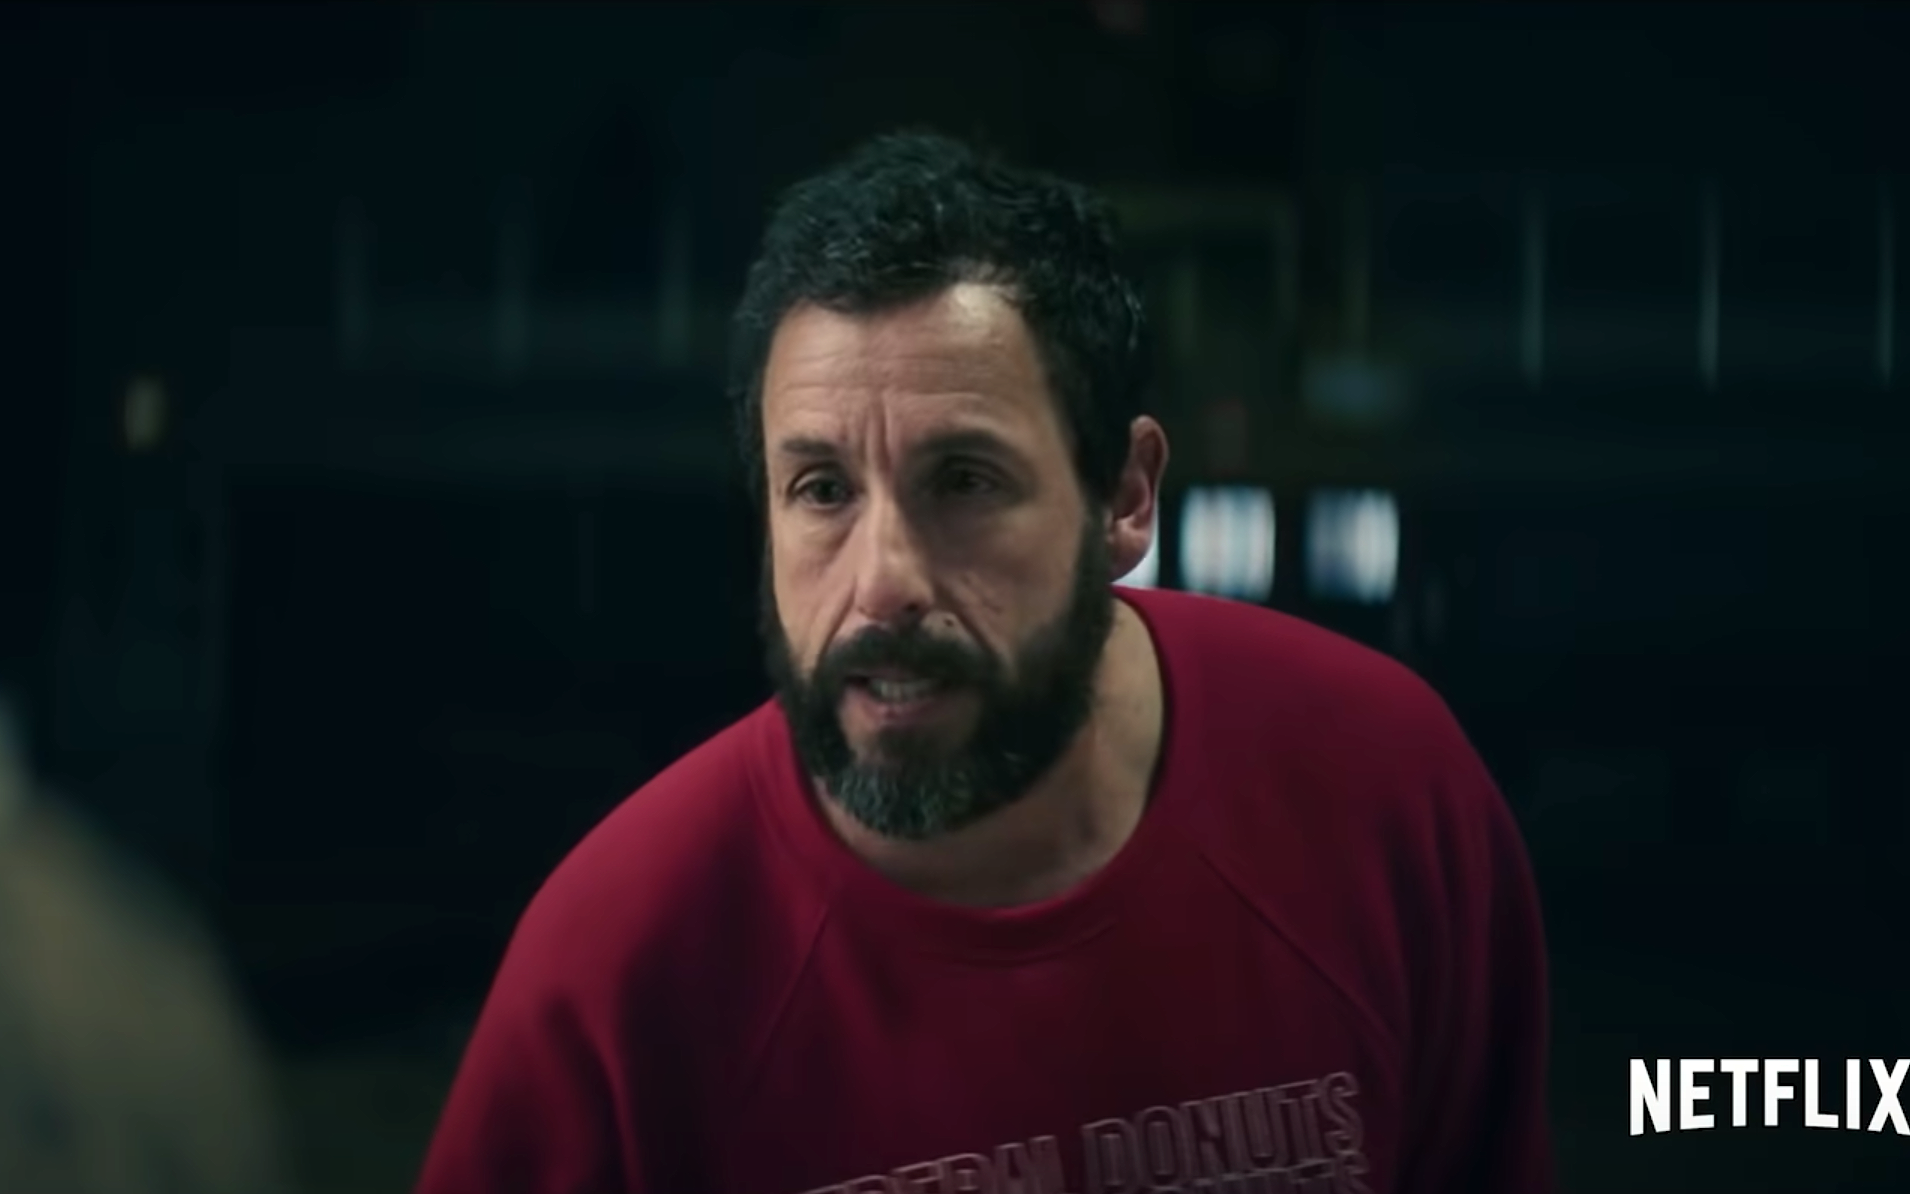 Adam Sandler's new movie 'Hustle' to feature a number of NBA players -  Basketball Network - Your daily dose of basketball